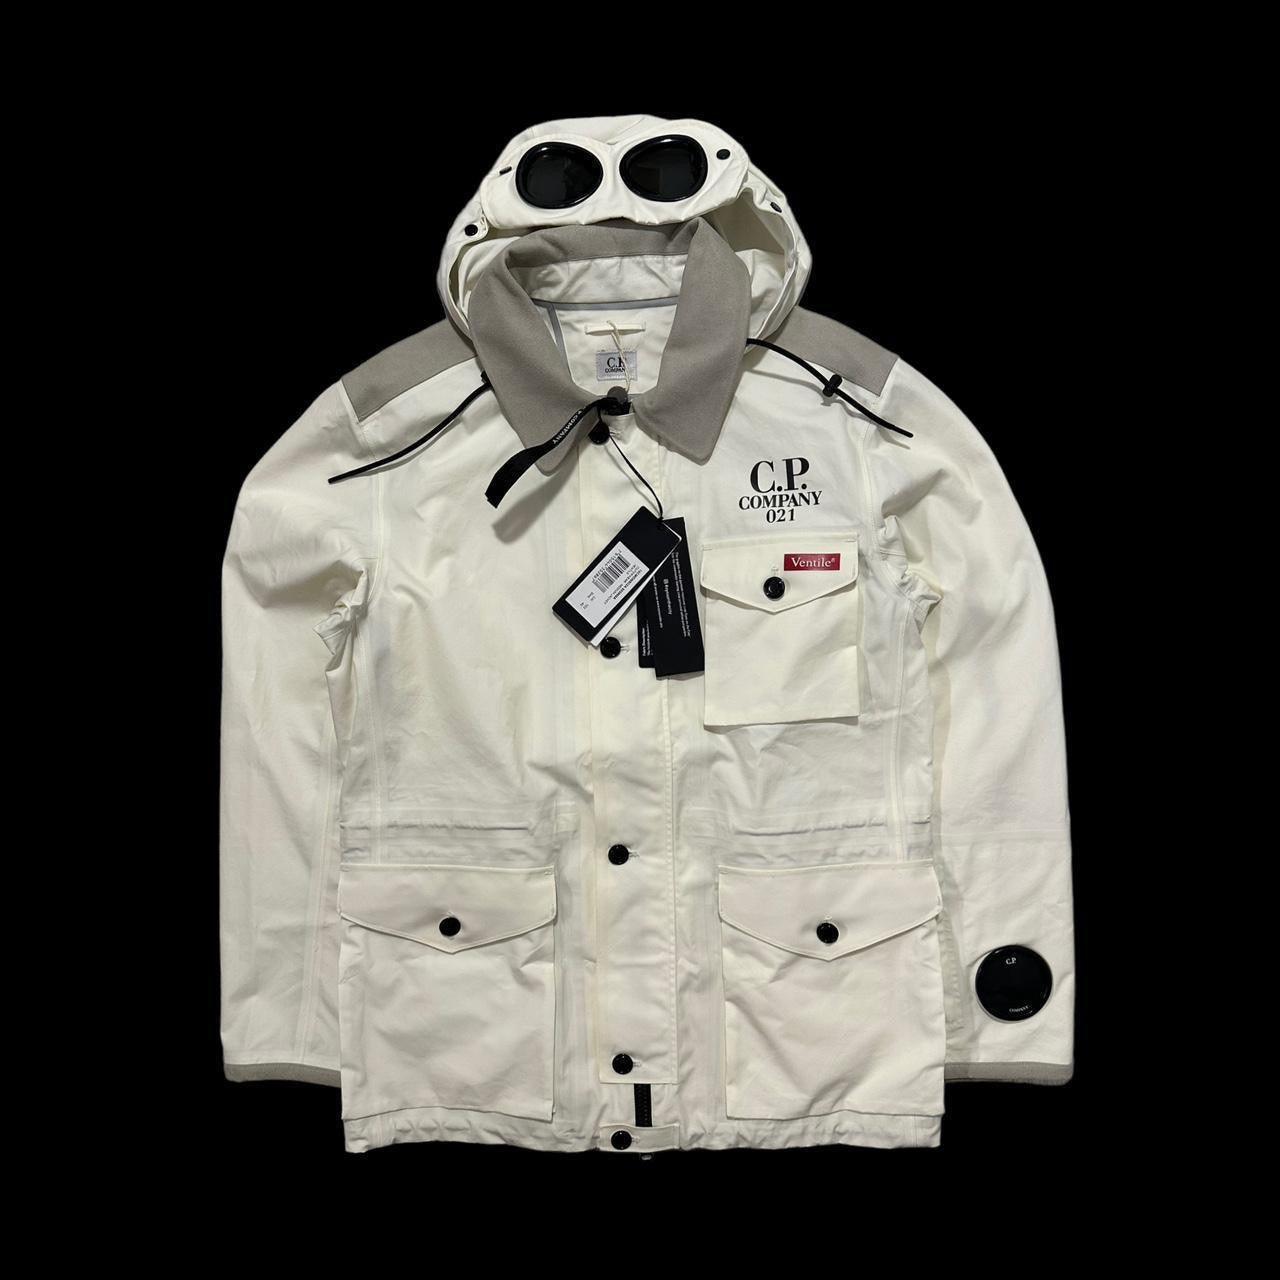 CP Company Ventile La Mille Goggle Jacket with Watch viewer Lens - Known Source